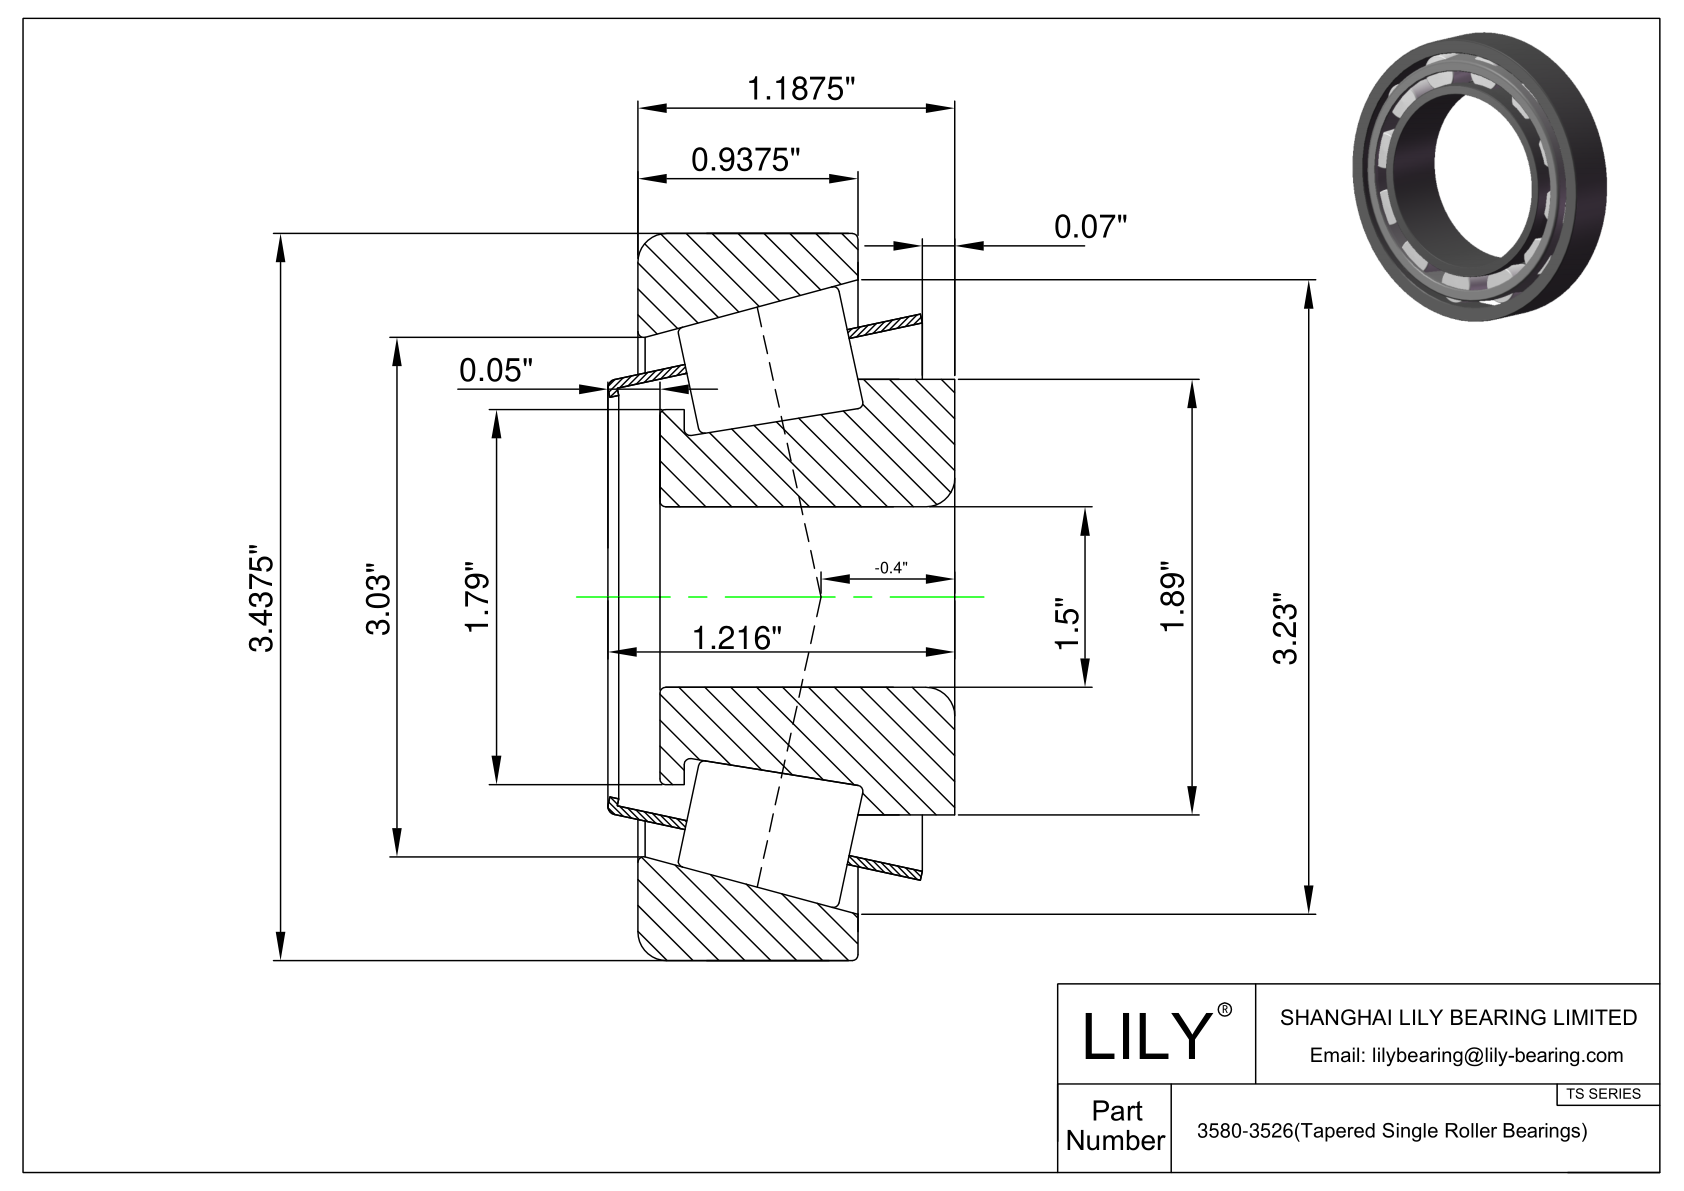 3580-3526 TS (Tapered Single Roller Bearings) (Imperial) cad drawing